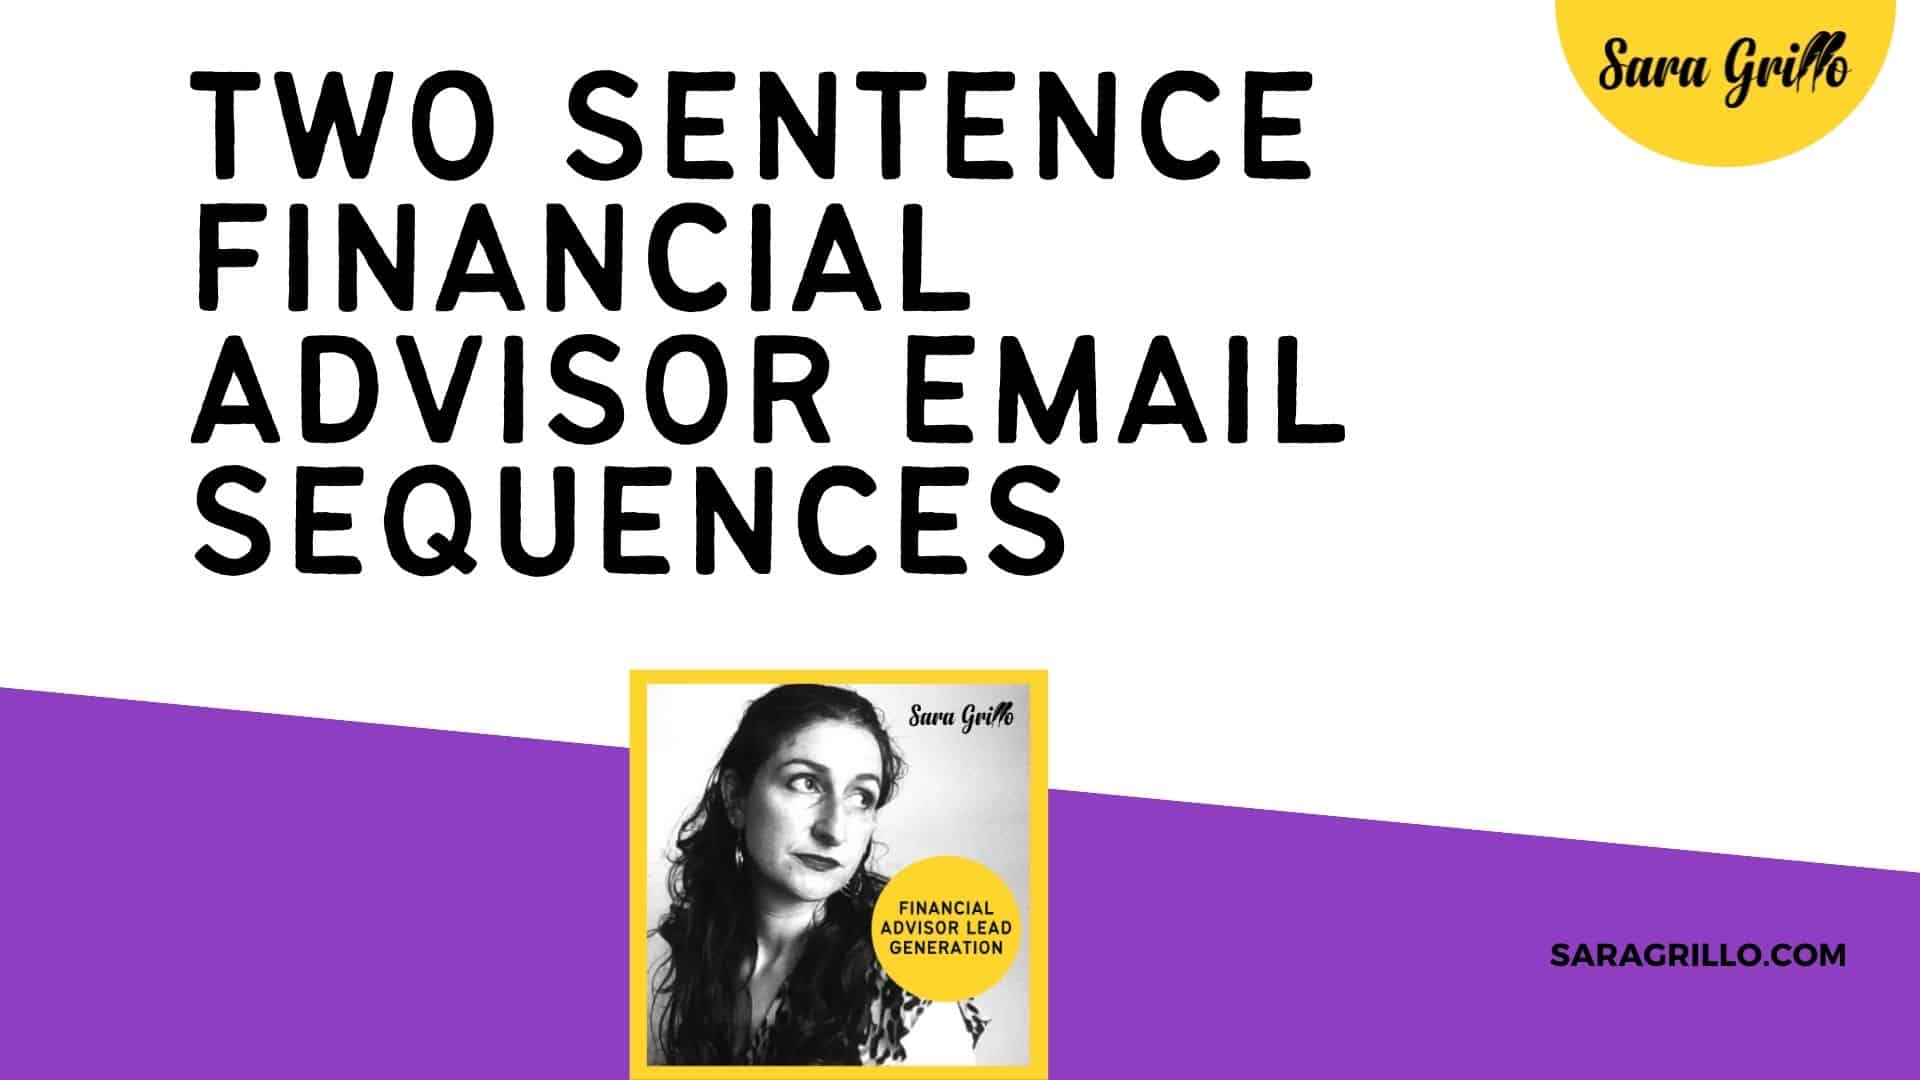 This blog provides sample financial advisor email sequences you can use to find wealthy clients.